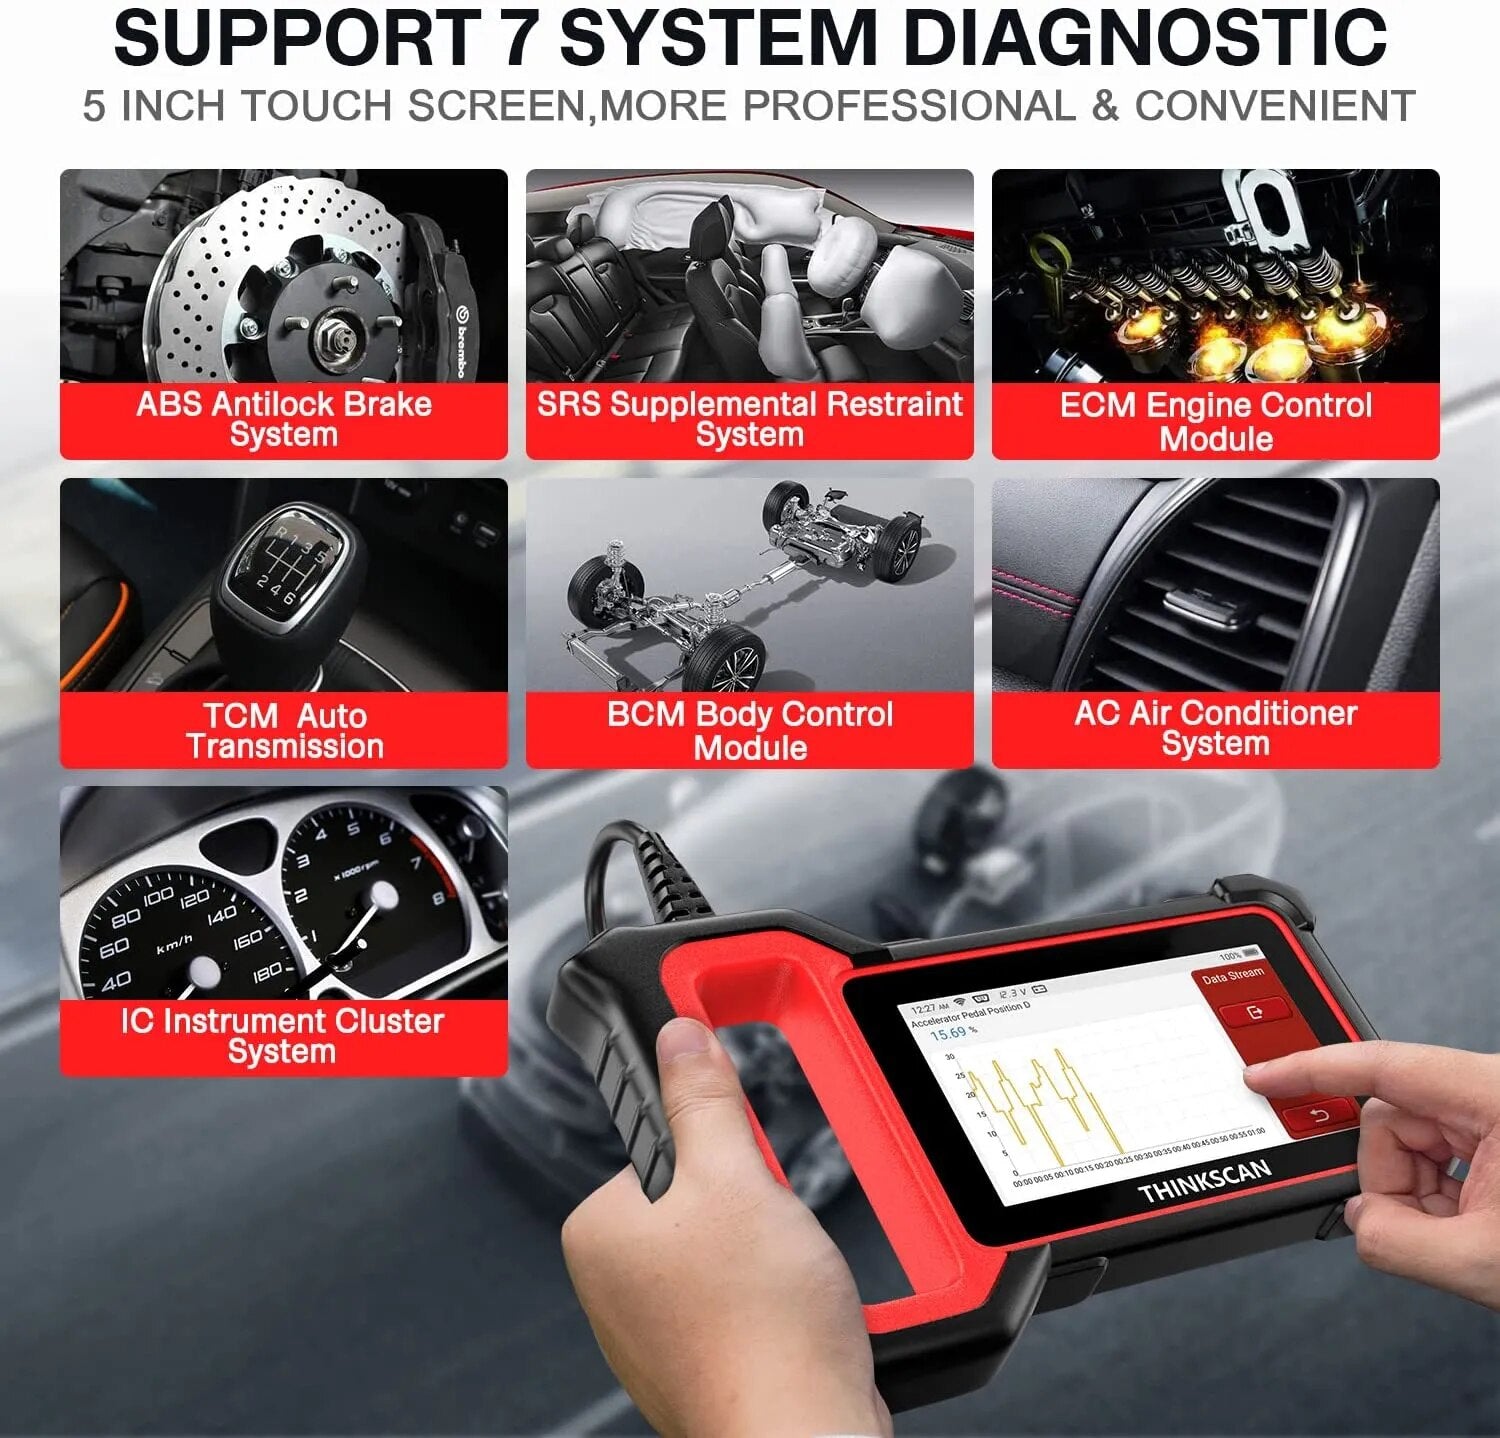 THINKCAR Thinkscan Plus S7 S6 S4 Obd2 Scanner Car Diagnostic Tools Automotivo Scanner Auto Diagnosis Tool Code Reader 28 Resets